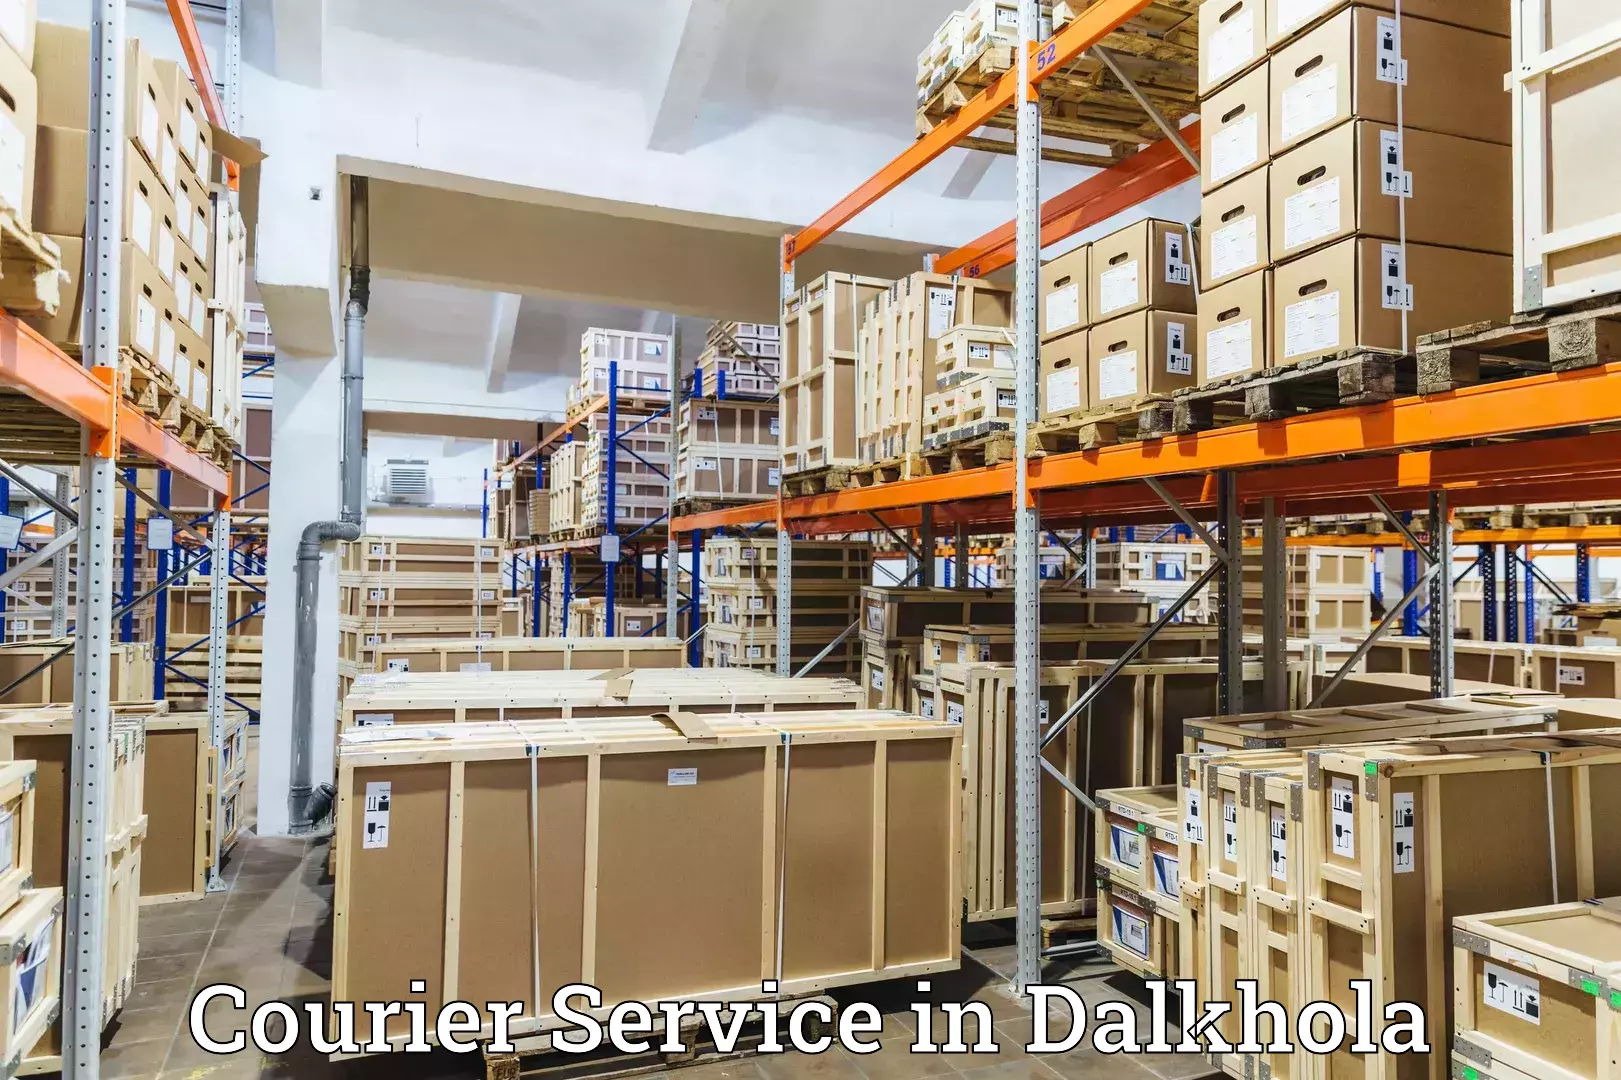 Customer-focused courier in Dalkhola